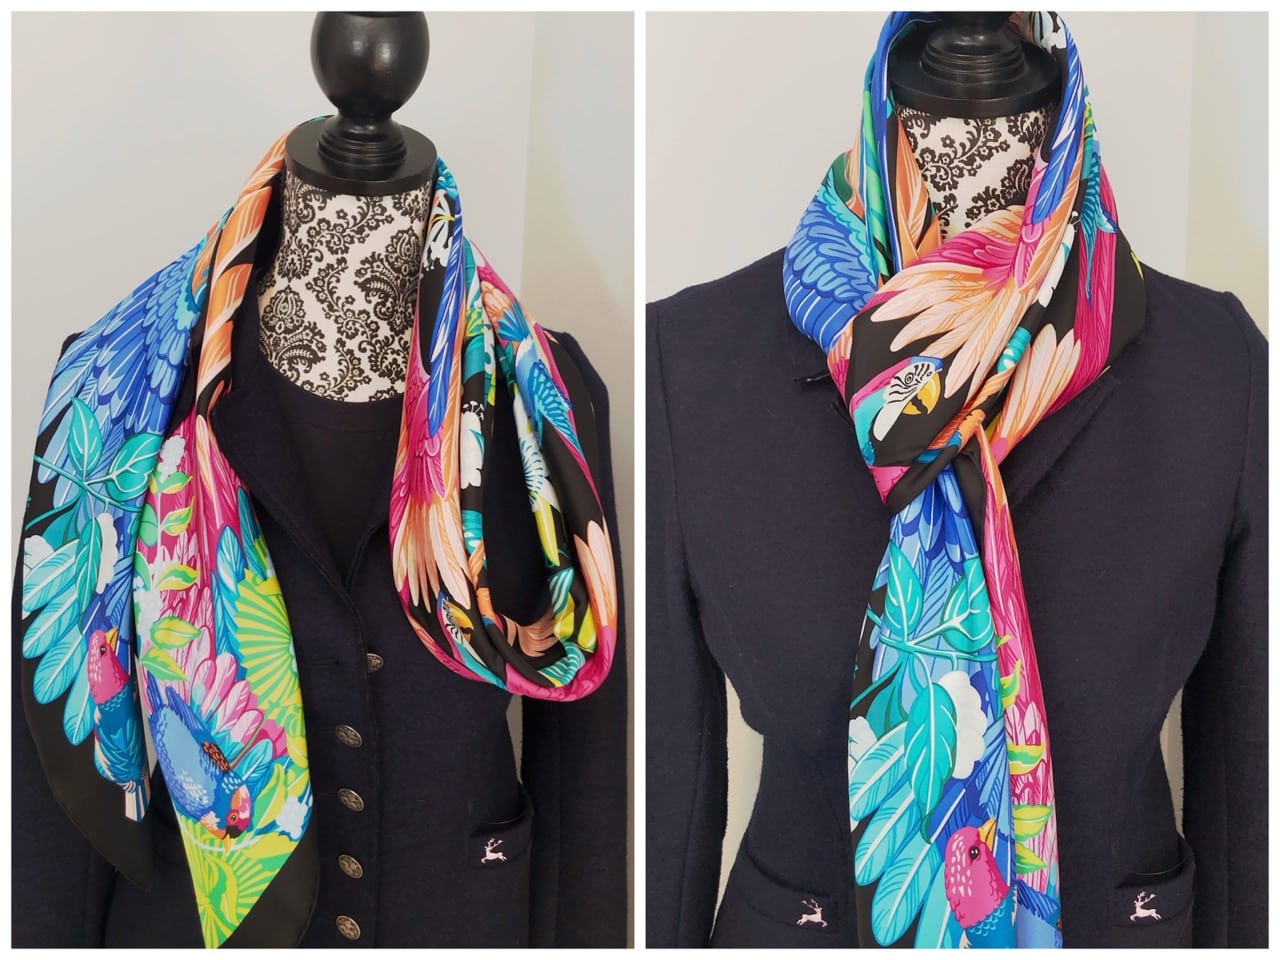 34 Stylish Ways To Tie A Twilly or Mitzah Scarf - Glamour and Gains